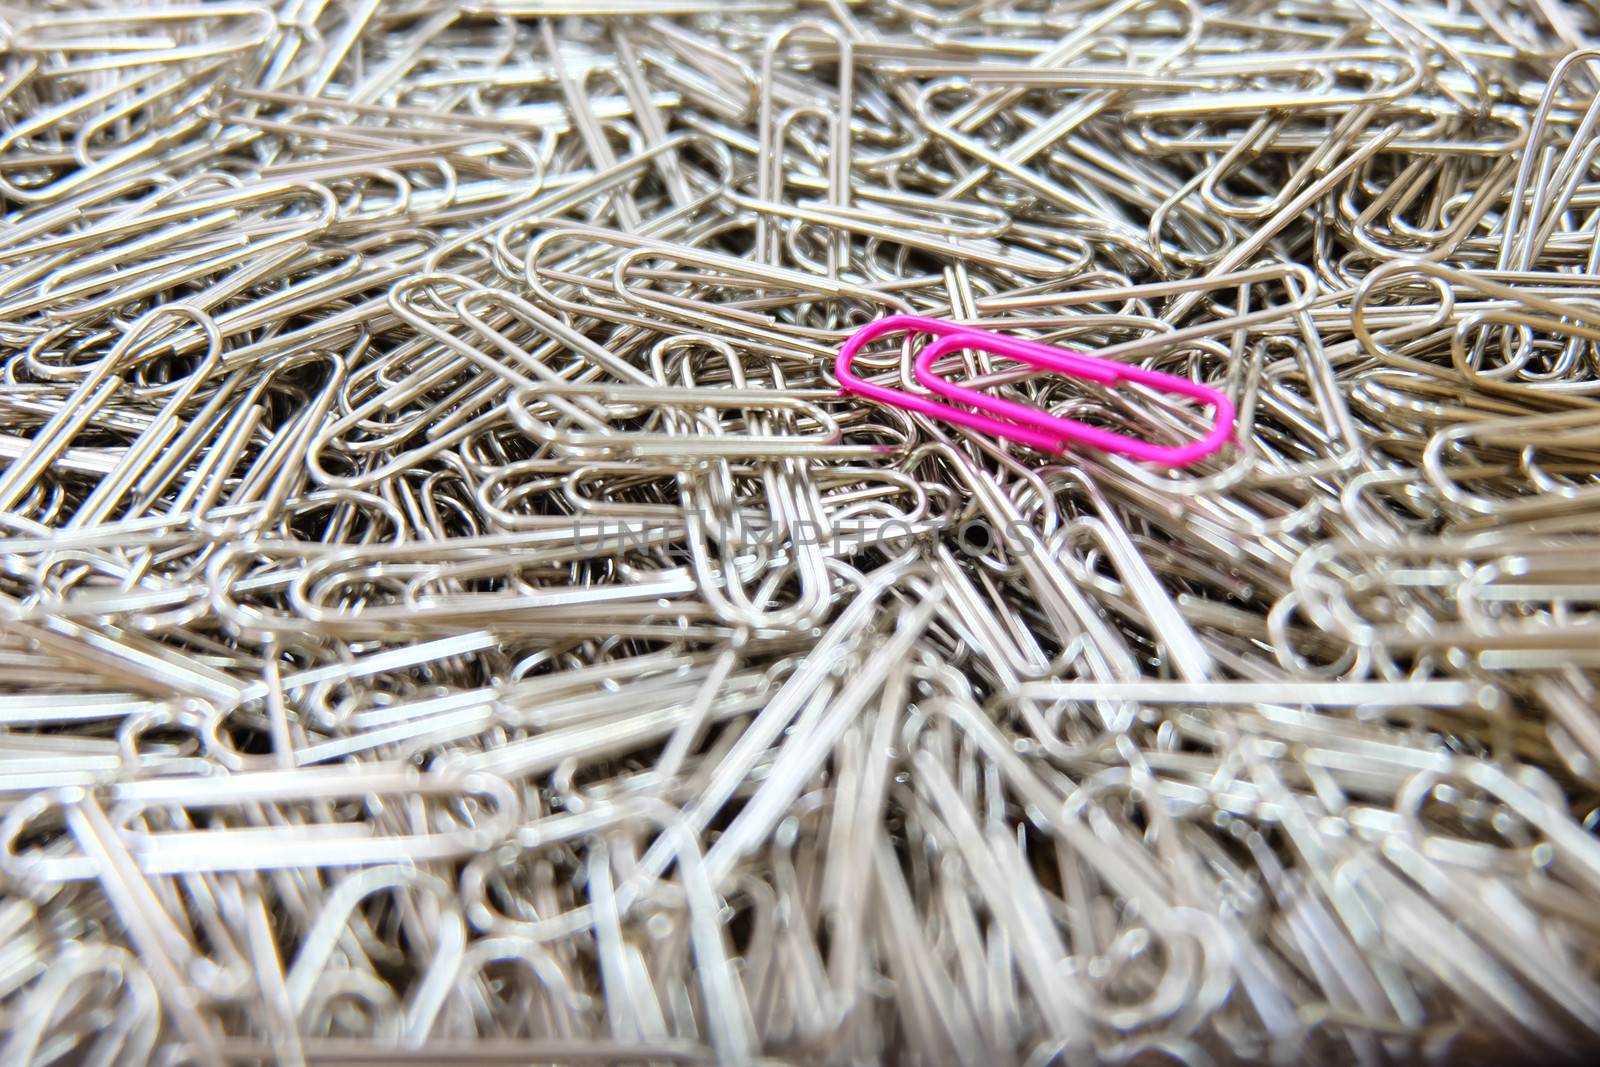 Pink paper clip on multiple paper clips background.